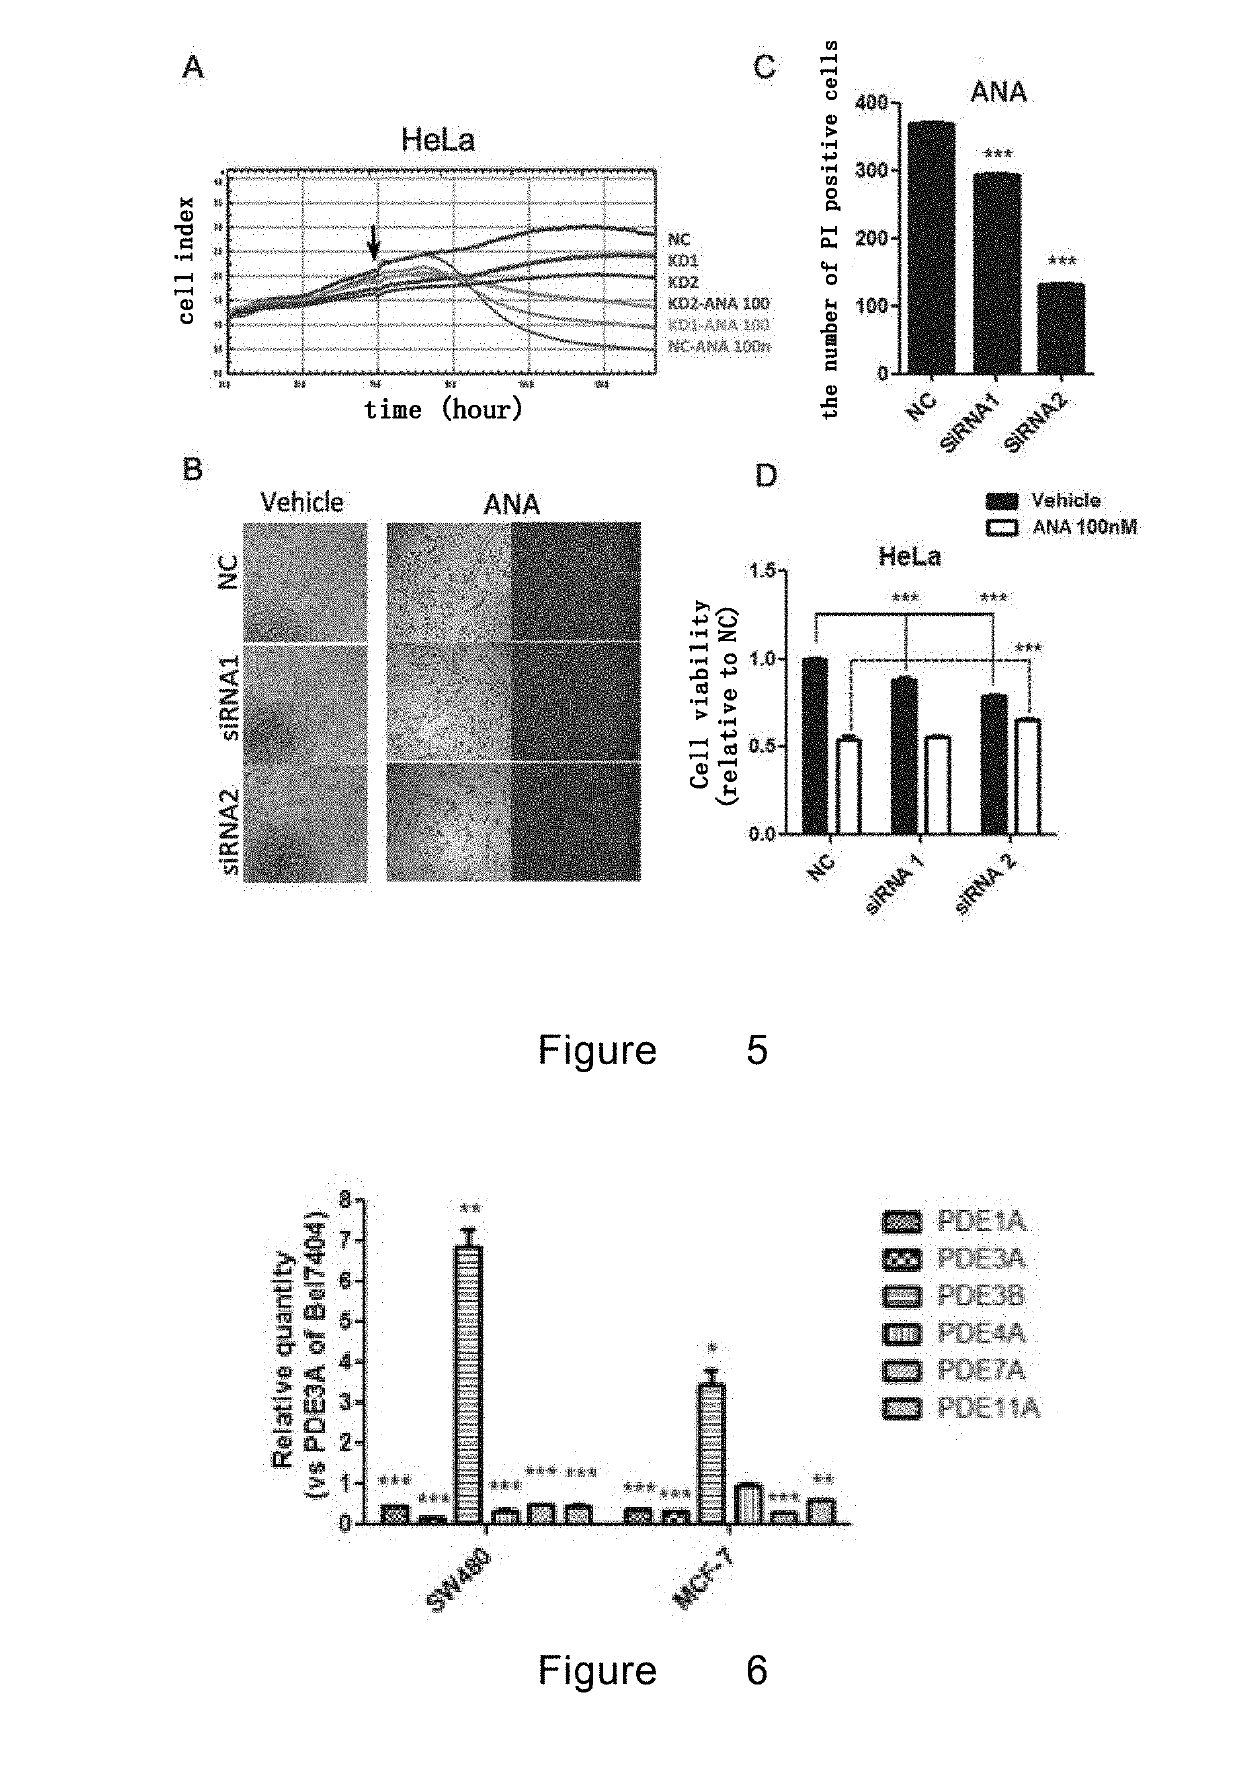 Application of pde3a in judgment of tumor treatment effect of anagrelid